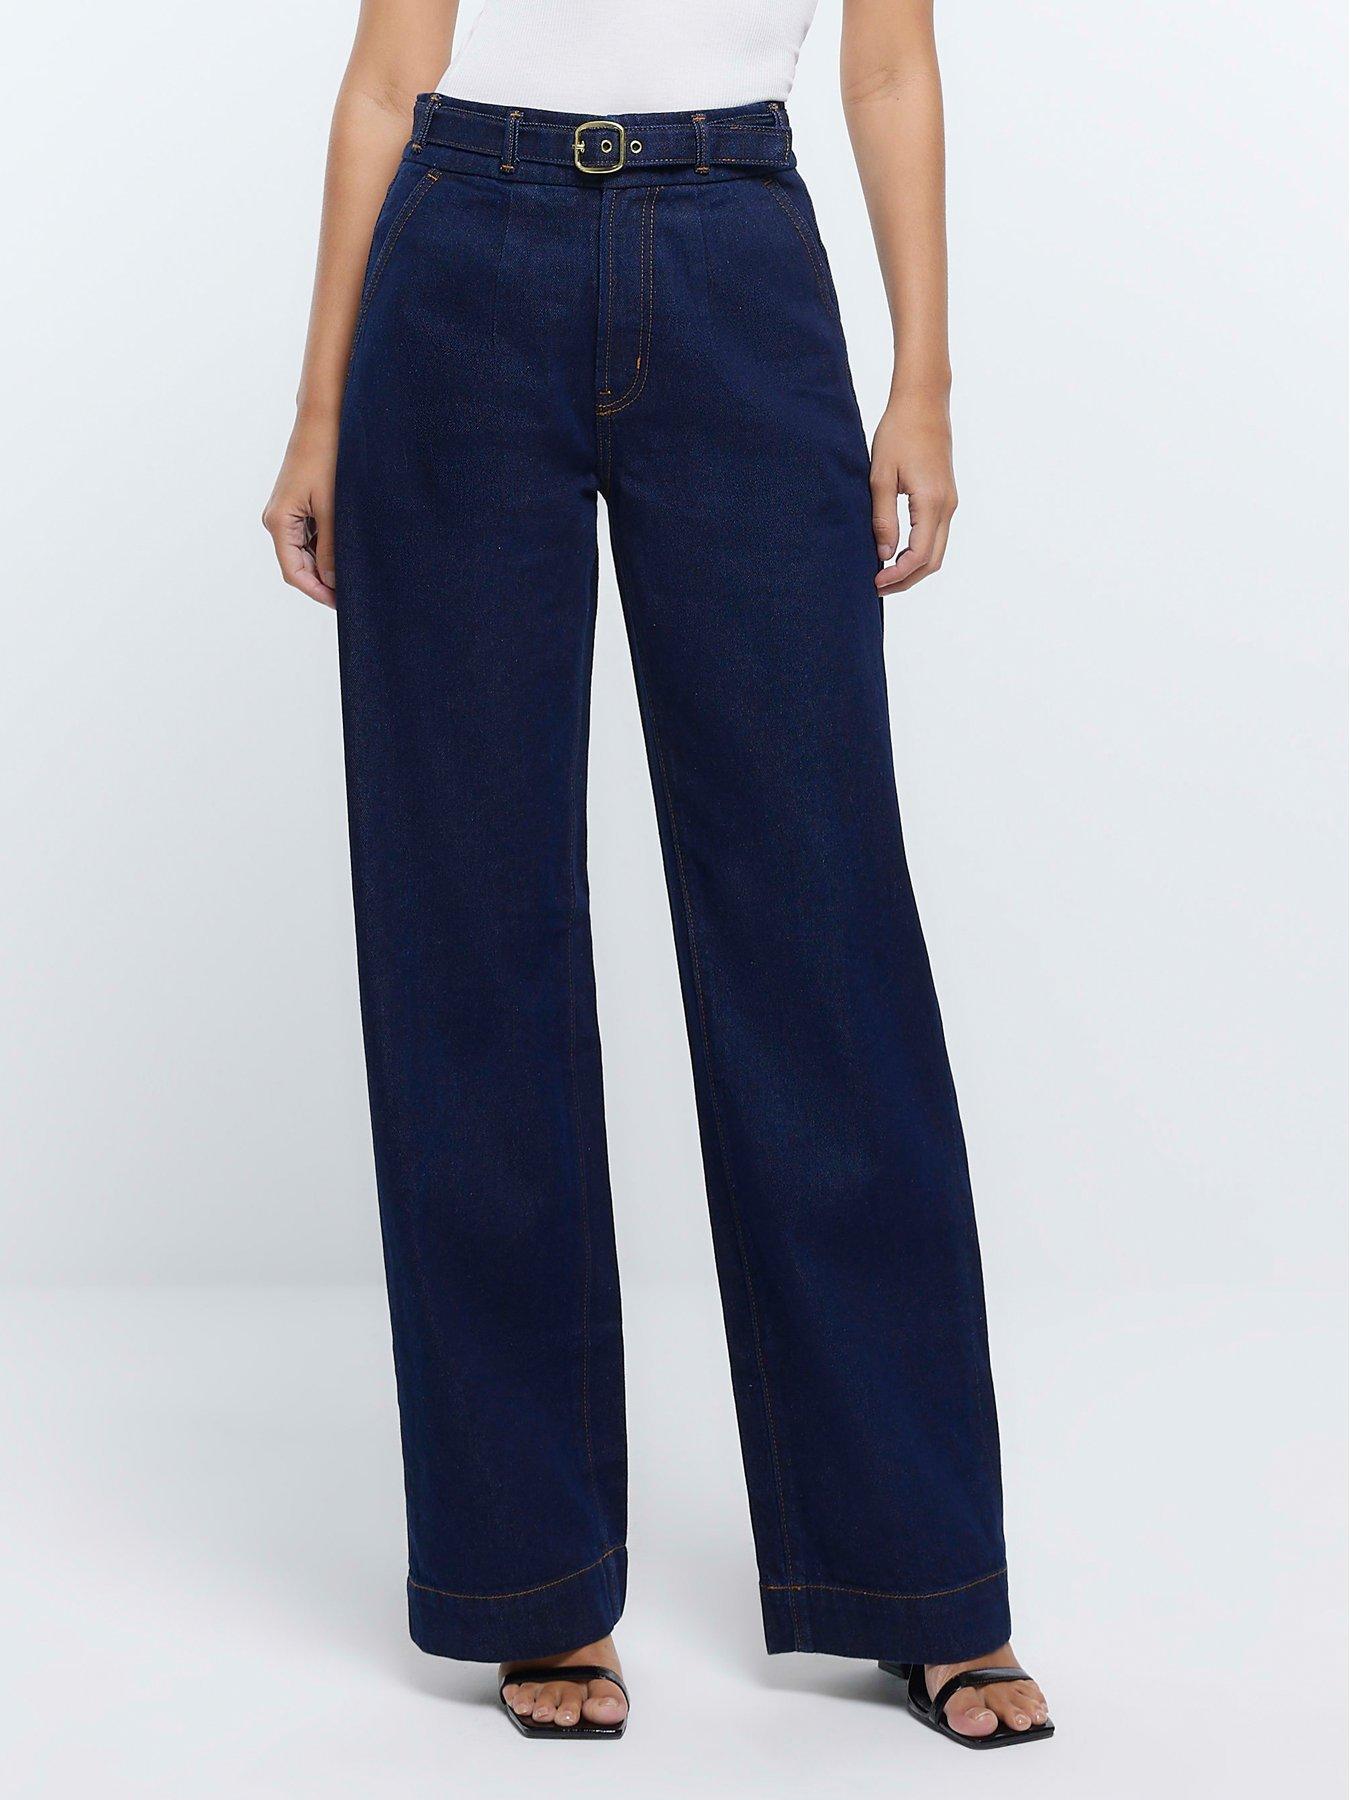 Extra High-Waisted Dark-Wash Wide-Leg Jeans for Women